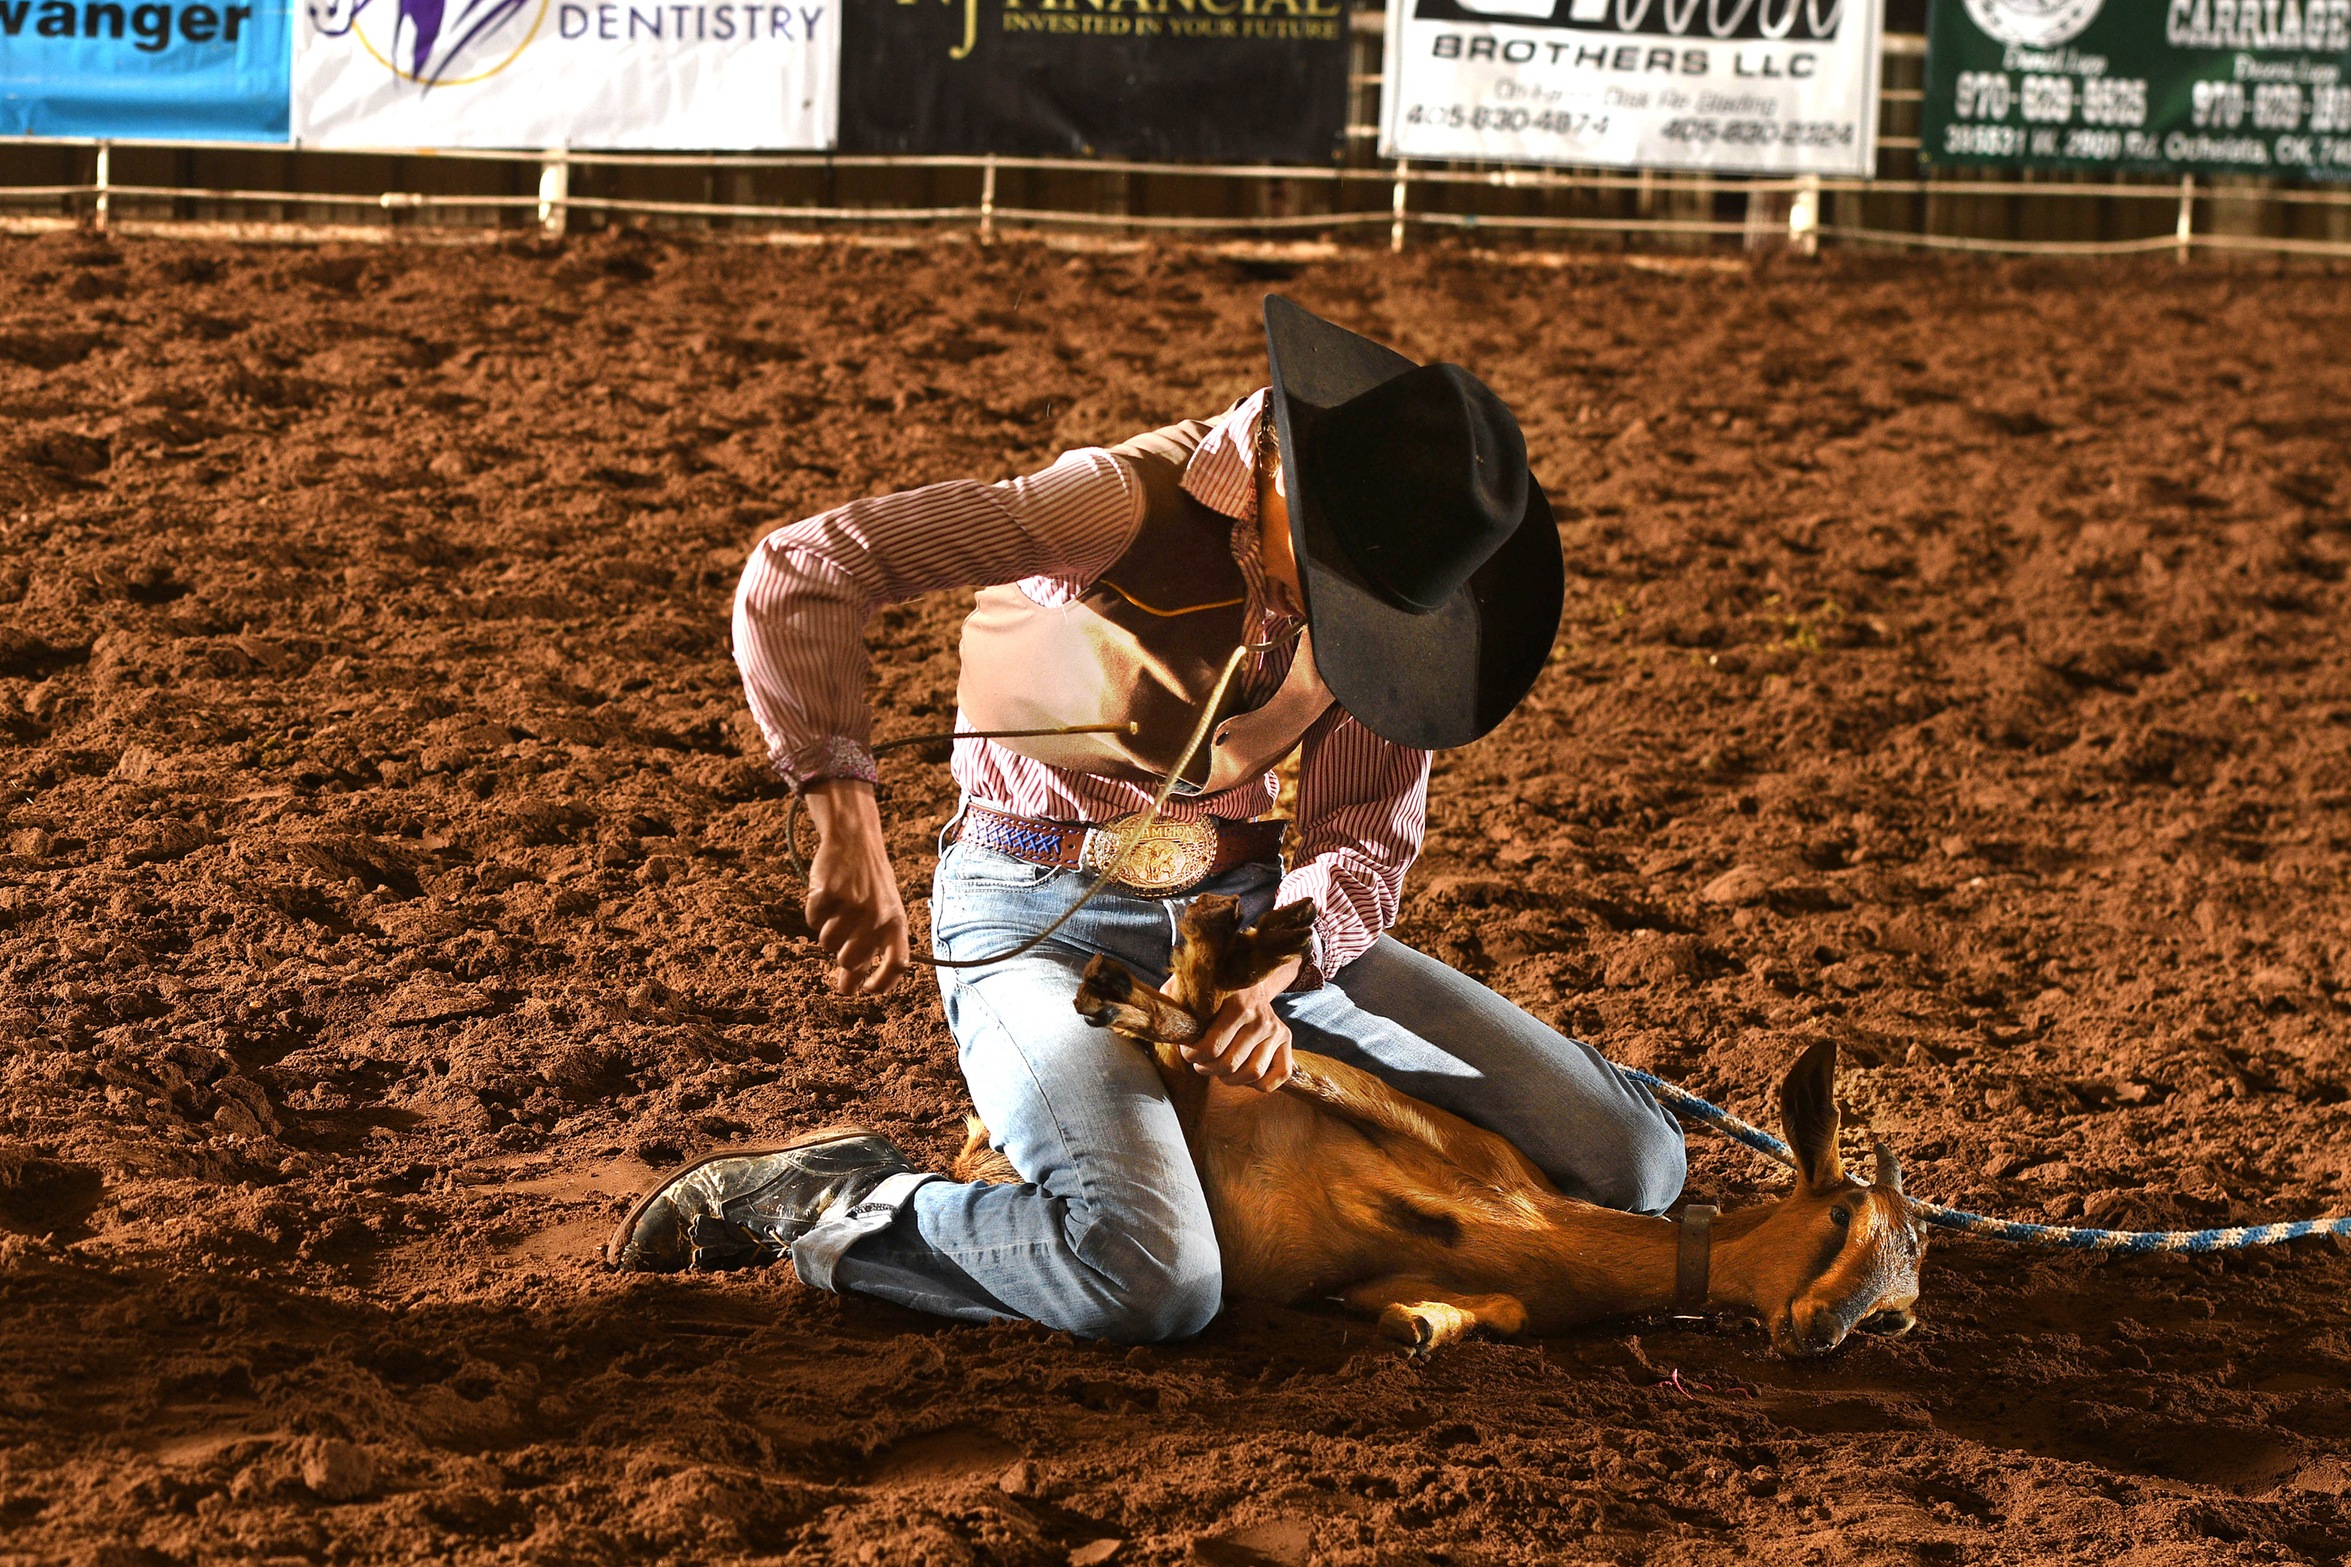 Broncobuster rodeo closes first semester at Northwestern Oklahoma State